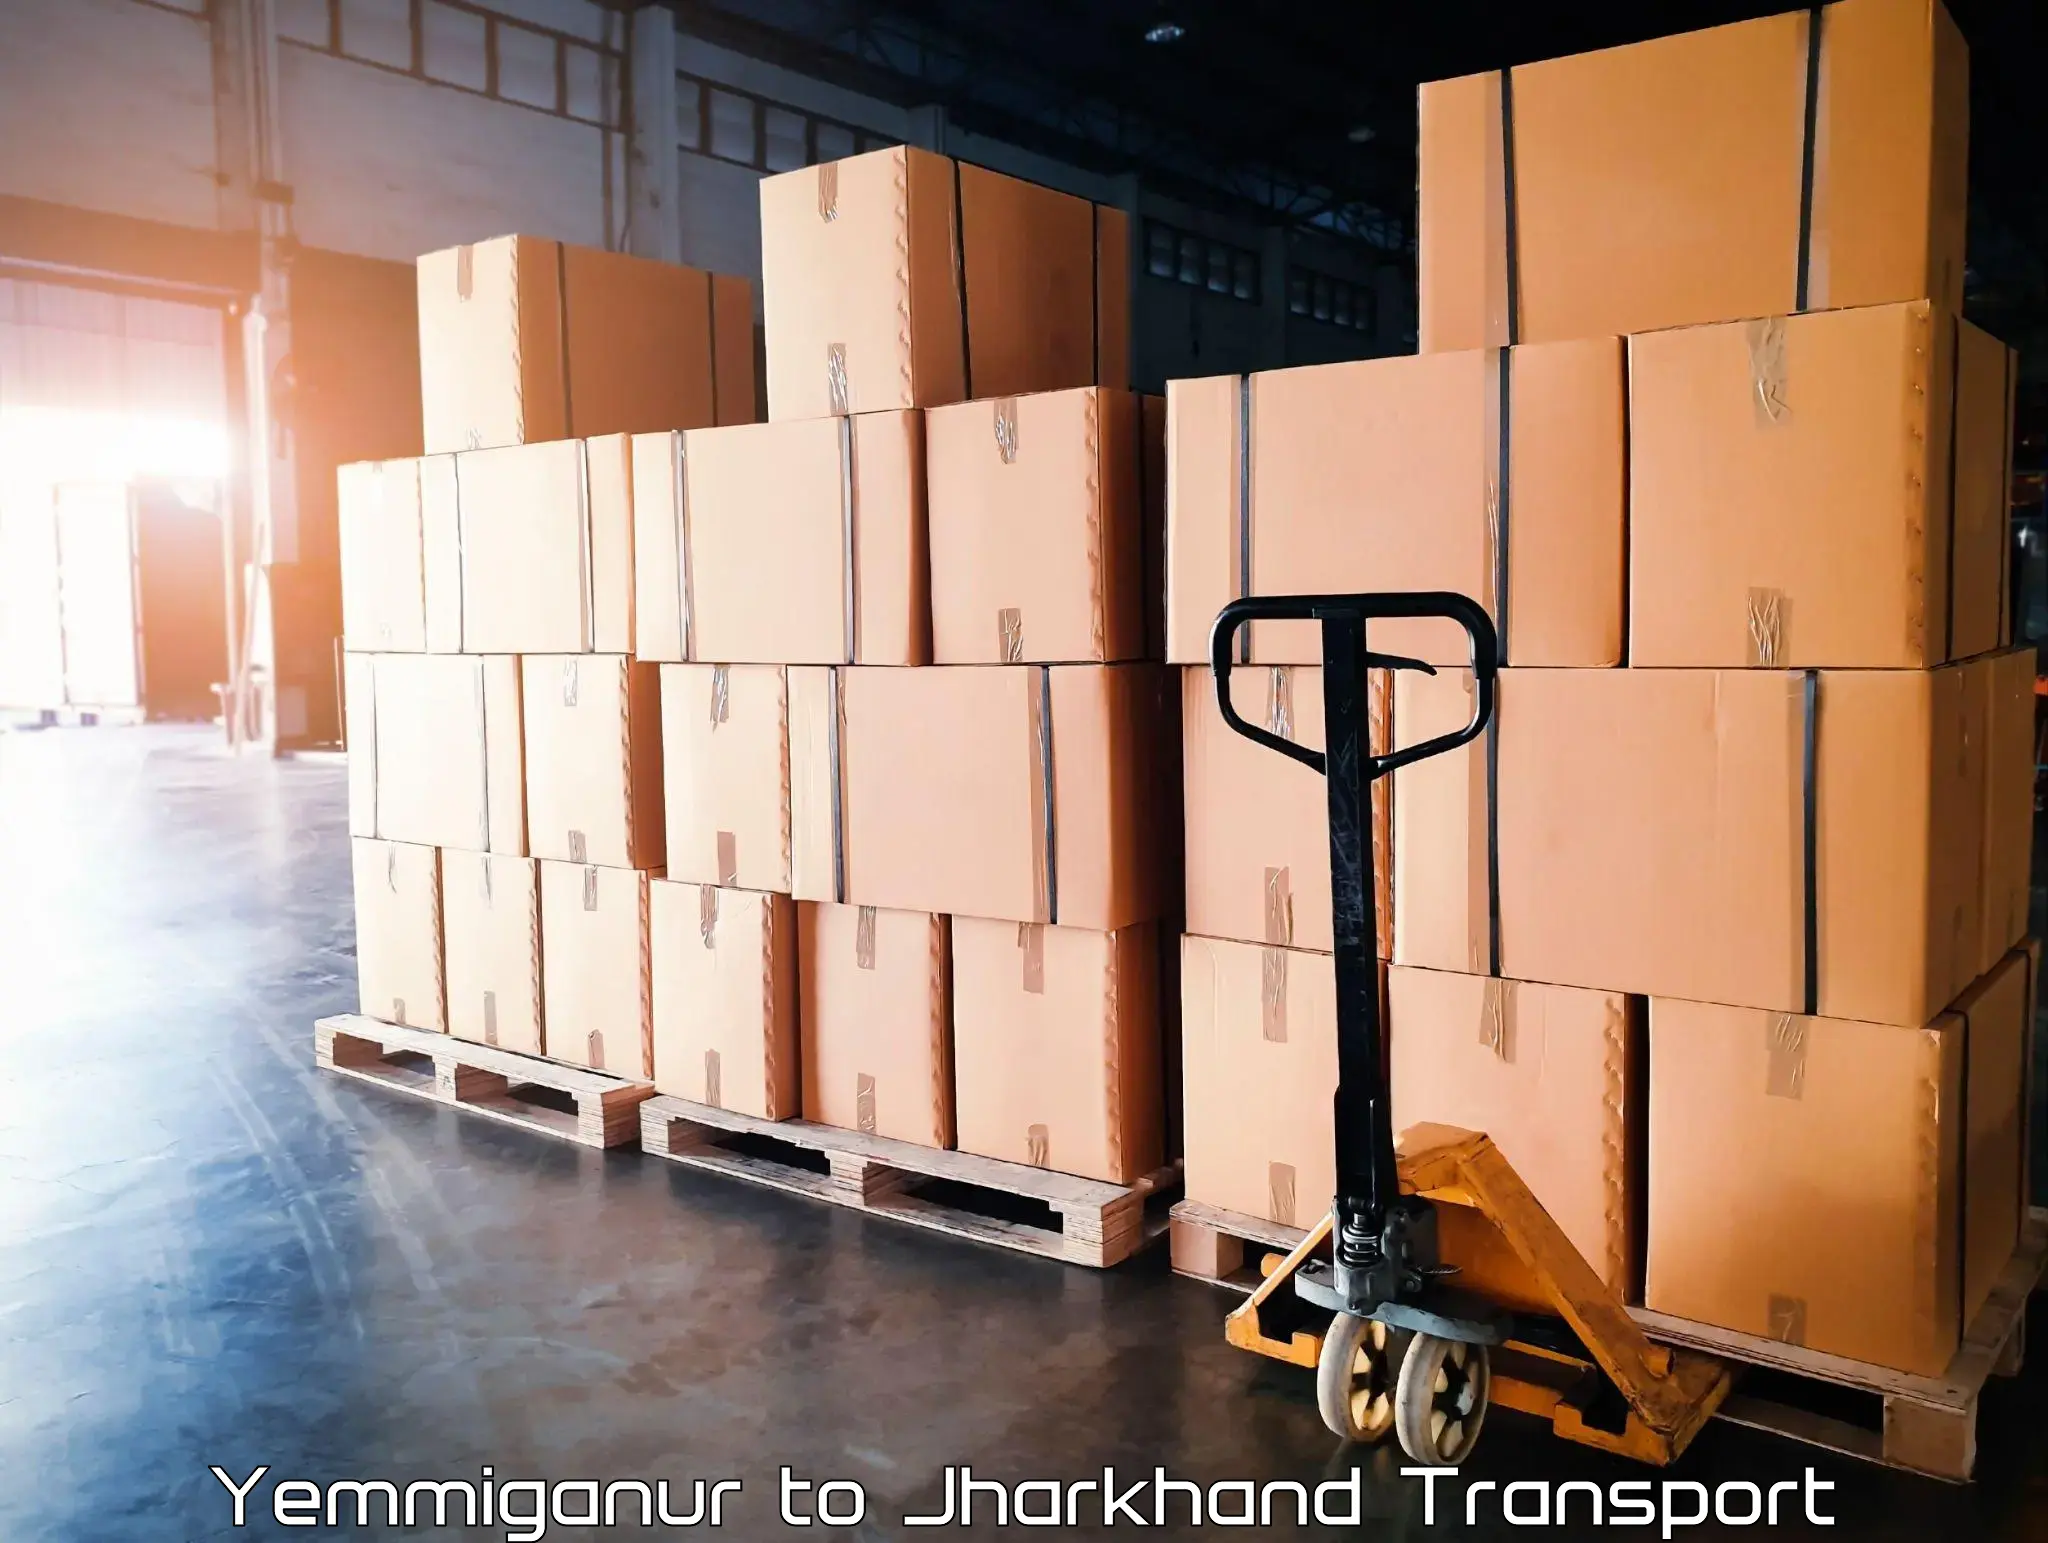 Transportation solution services in Yemmiganur to Dhanbad